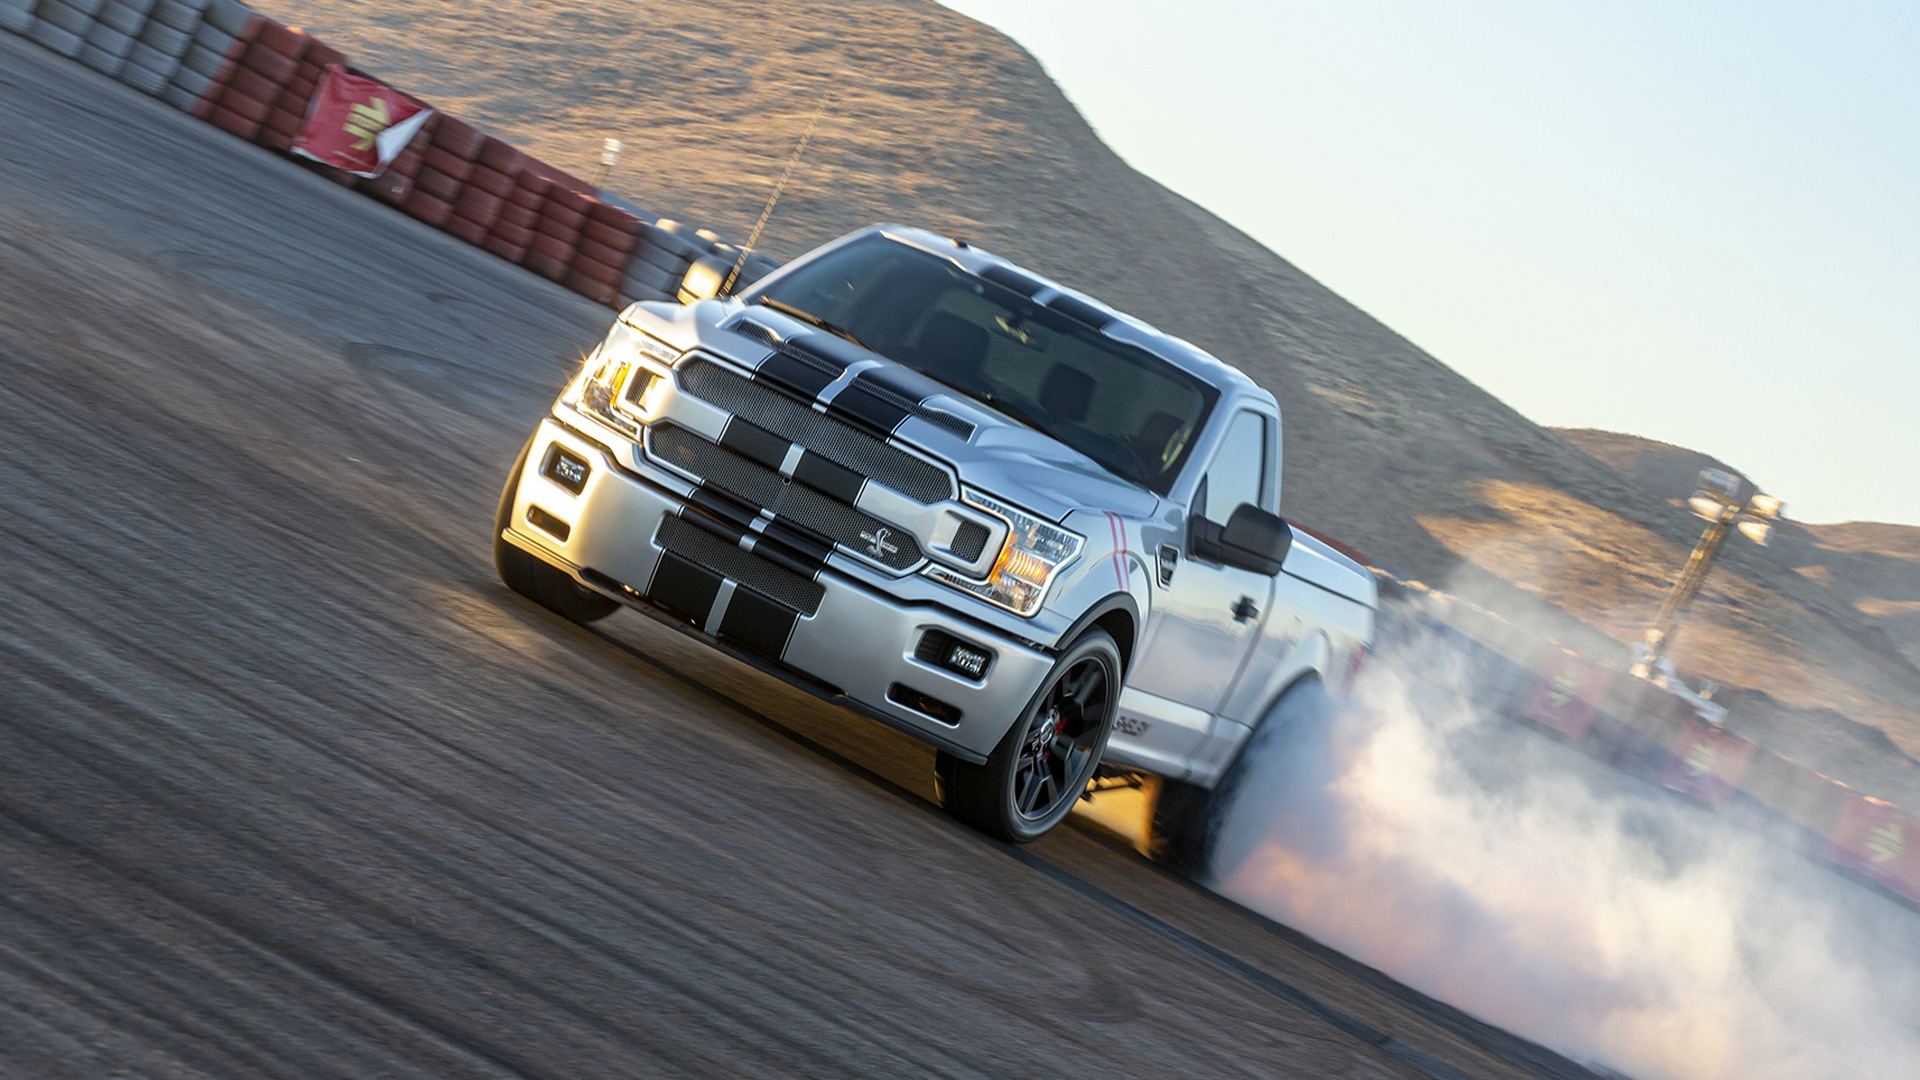 With 770 Hp And 93 385 Price The Ford Shelby F 150 Super Snake Sport Is All About Big Numbers